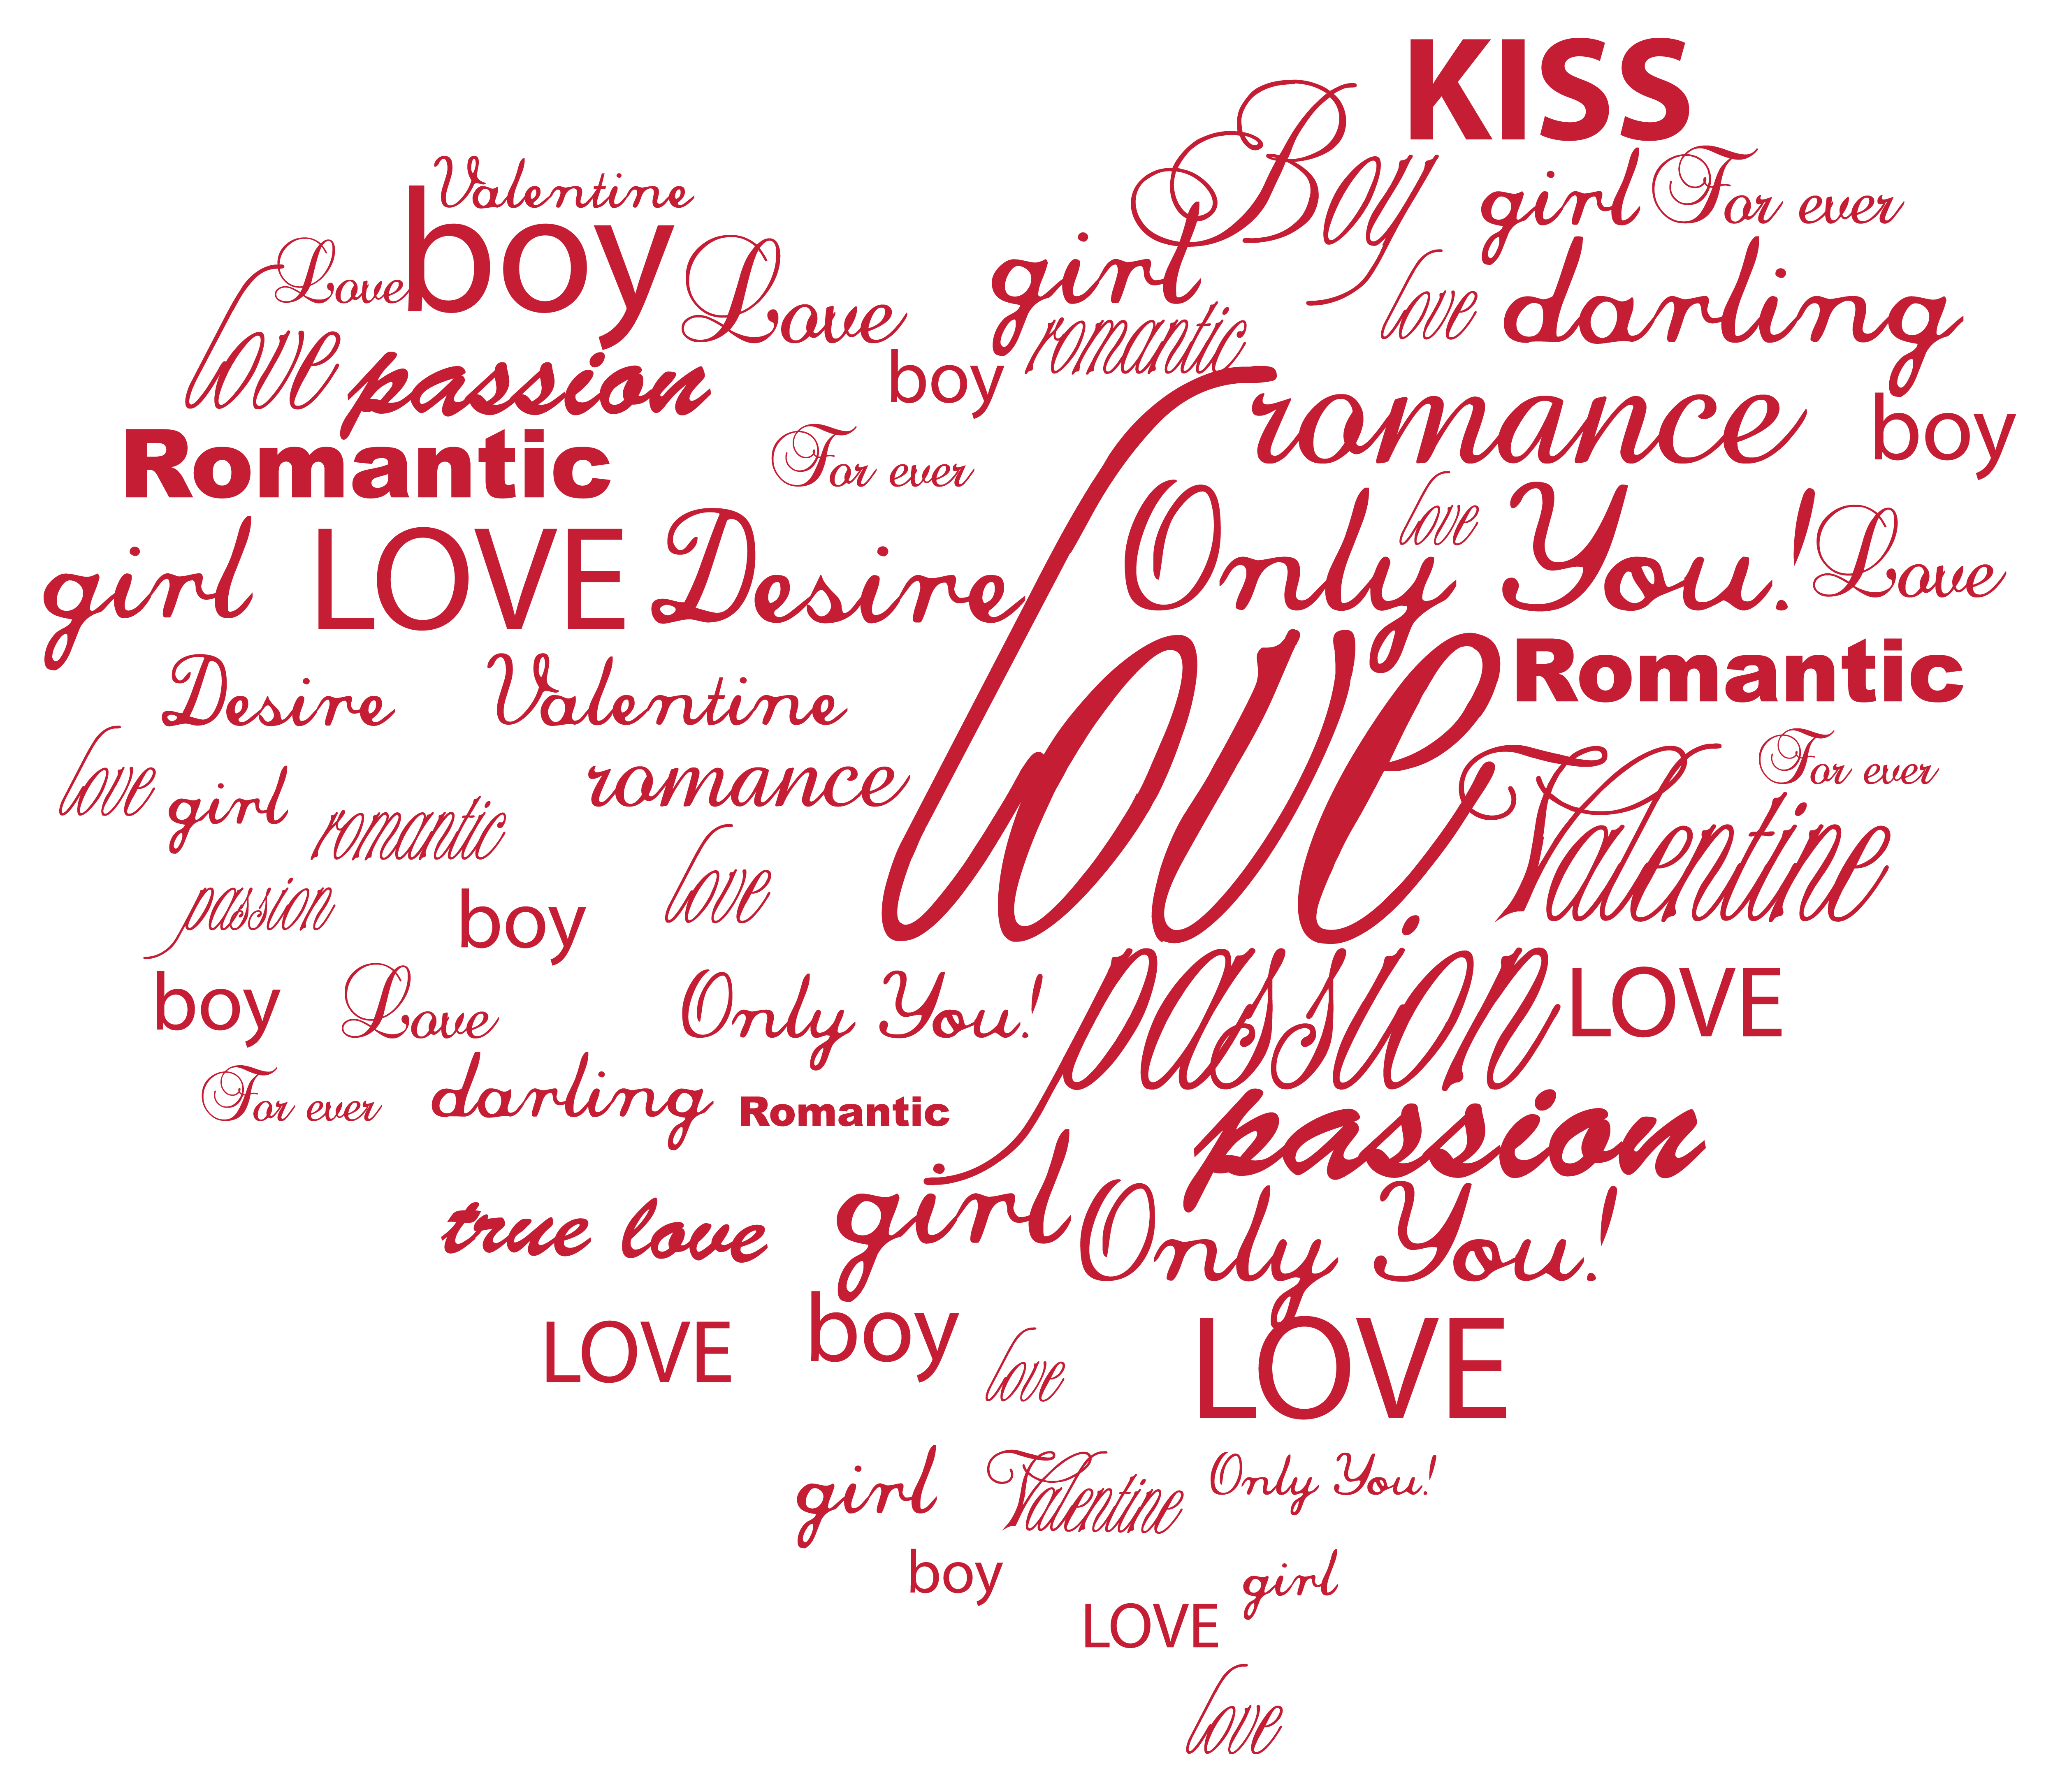 hearts clipart calligraphy